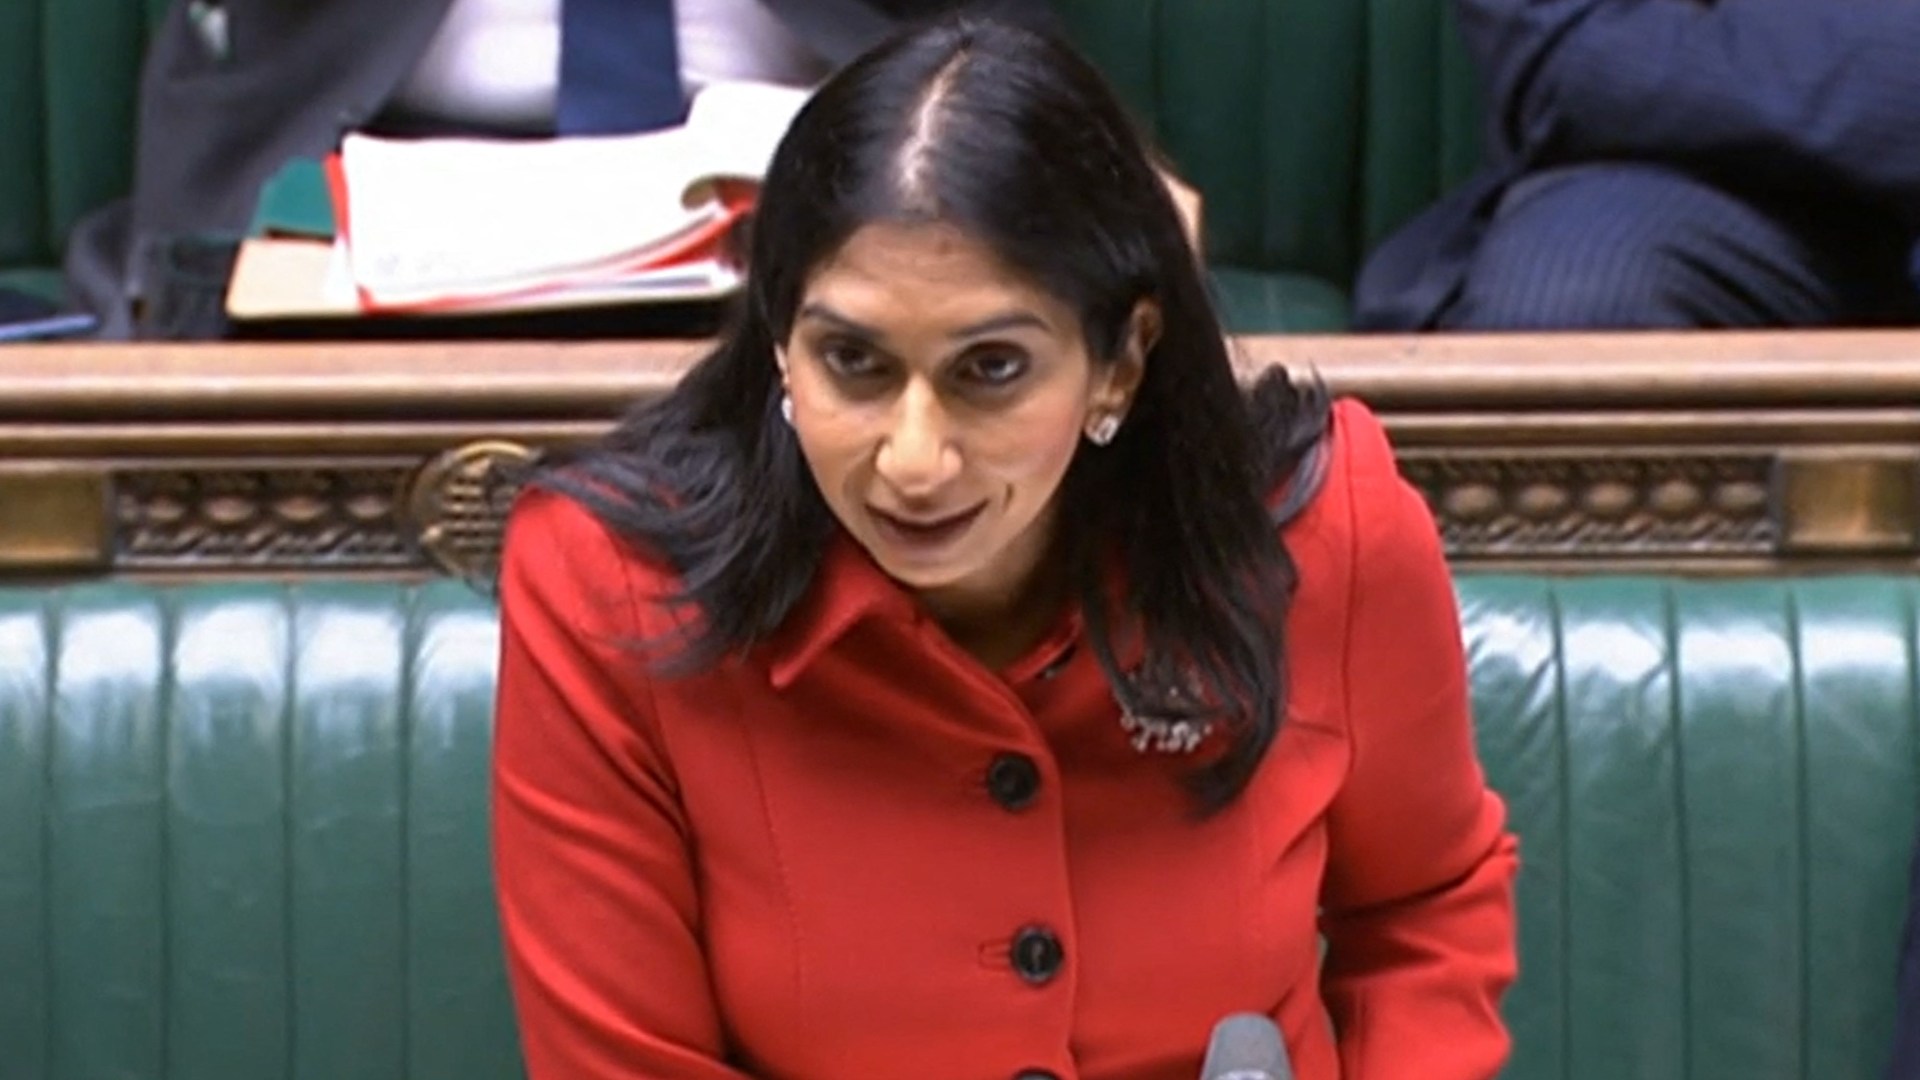 Suella braverman, the Home Secretary, confronts PM before Cabinet on his plans to issue 1000s student visas for India